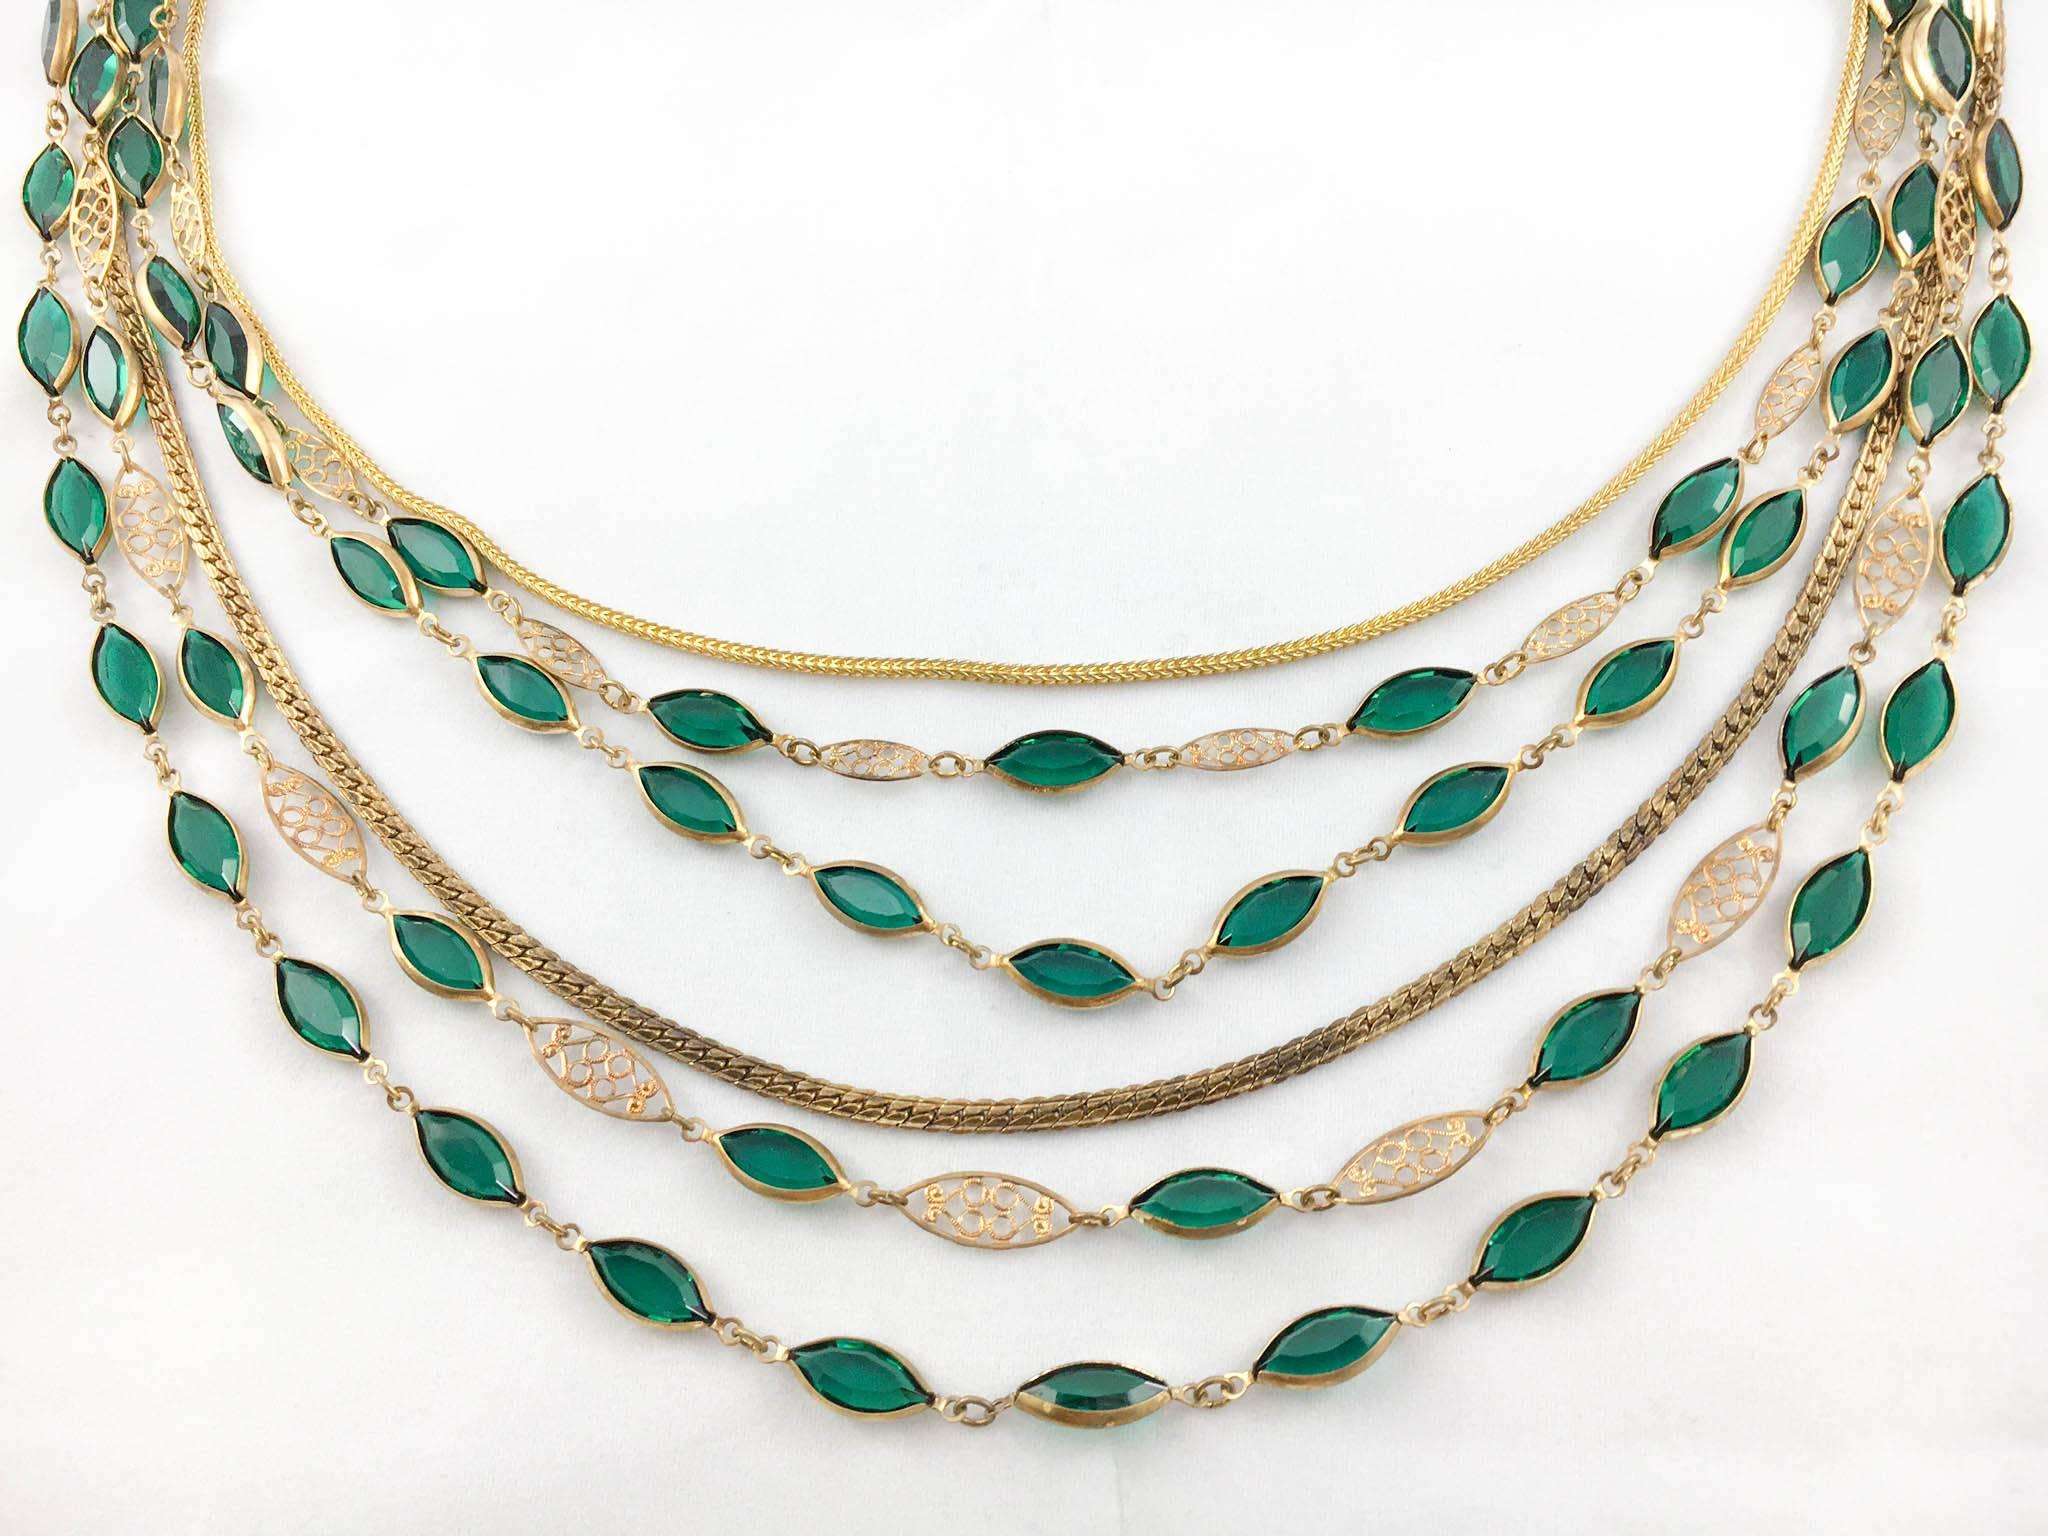 Women's Multi-Strand Gold-Toned and Green Paste Necklace - 1940s/1950s For Sale